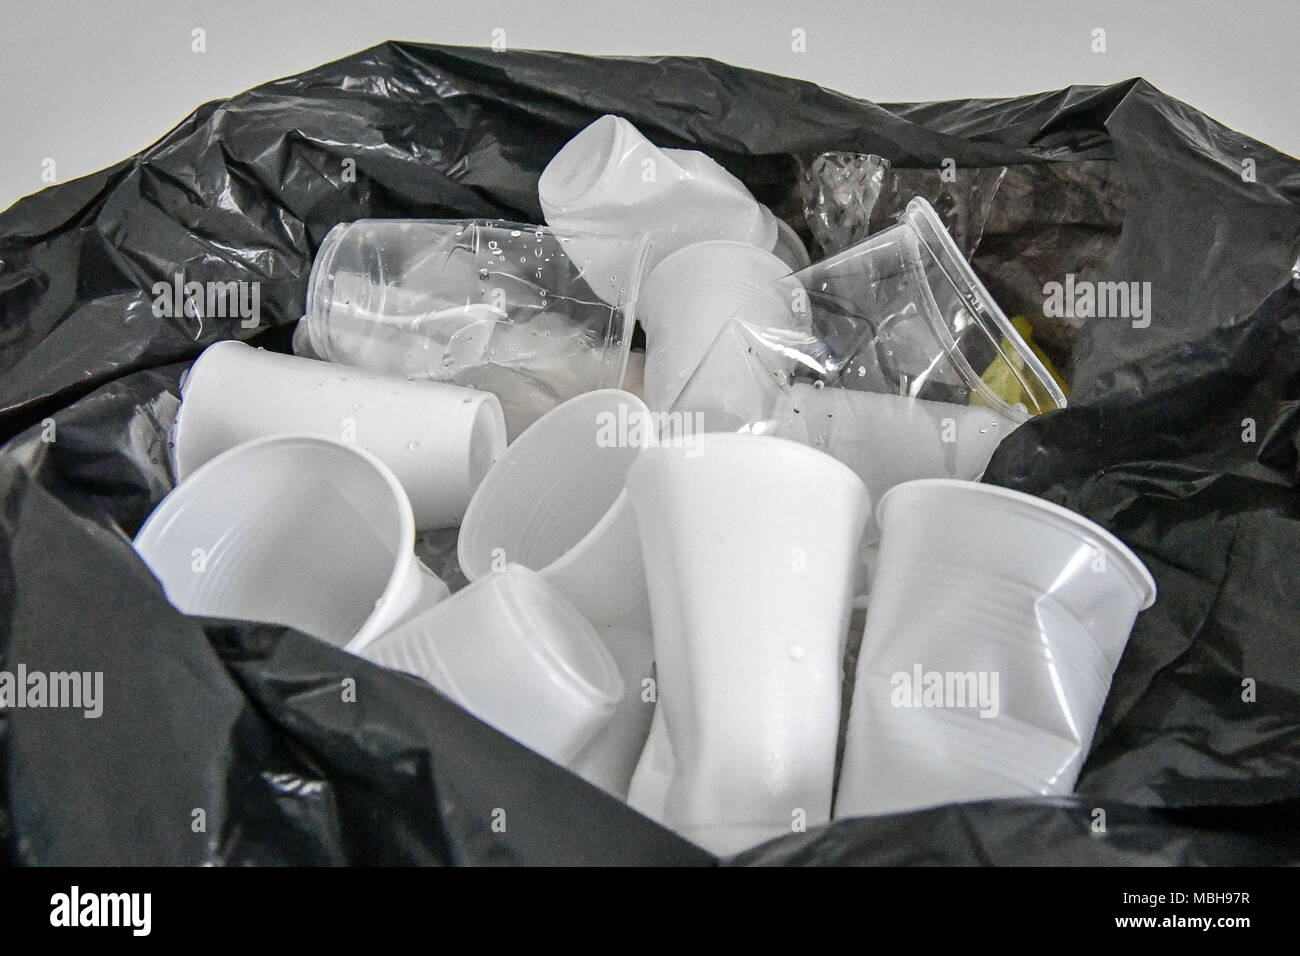 Used disposable drinking cups fill the top of a black bin bag. While NHS trusts across the country opened up about the scale of disposable cup use, Government departments were less forthcoming. Stock Photo